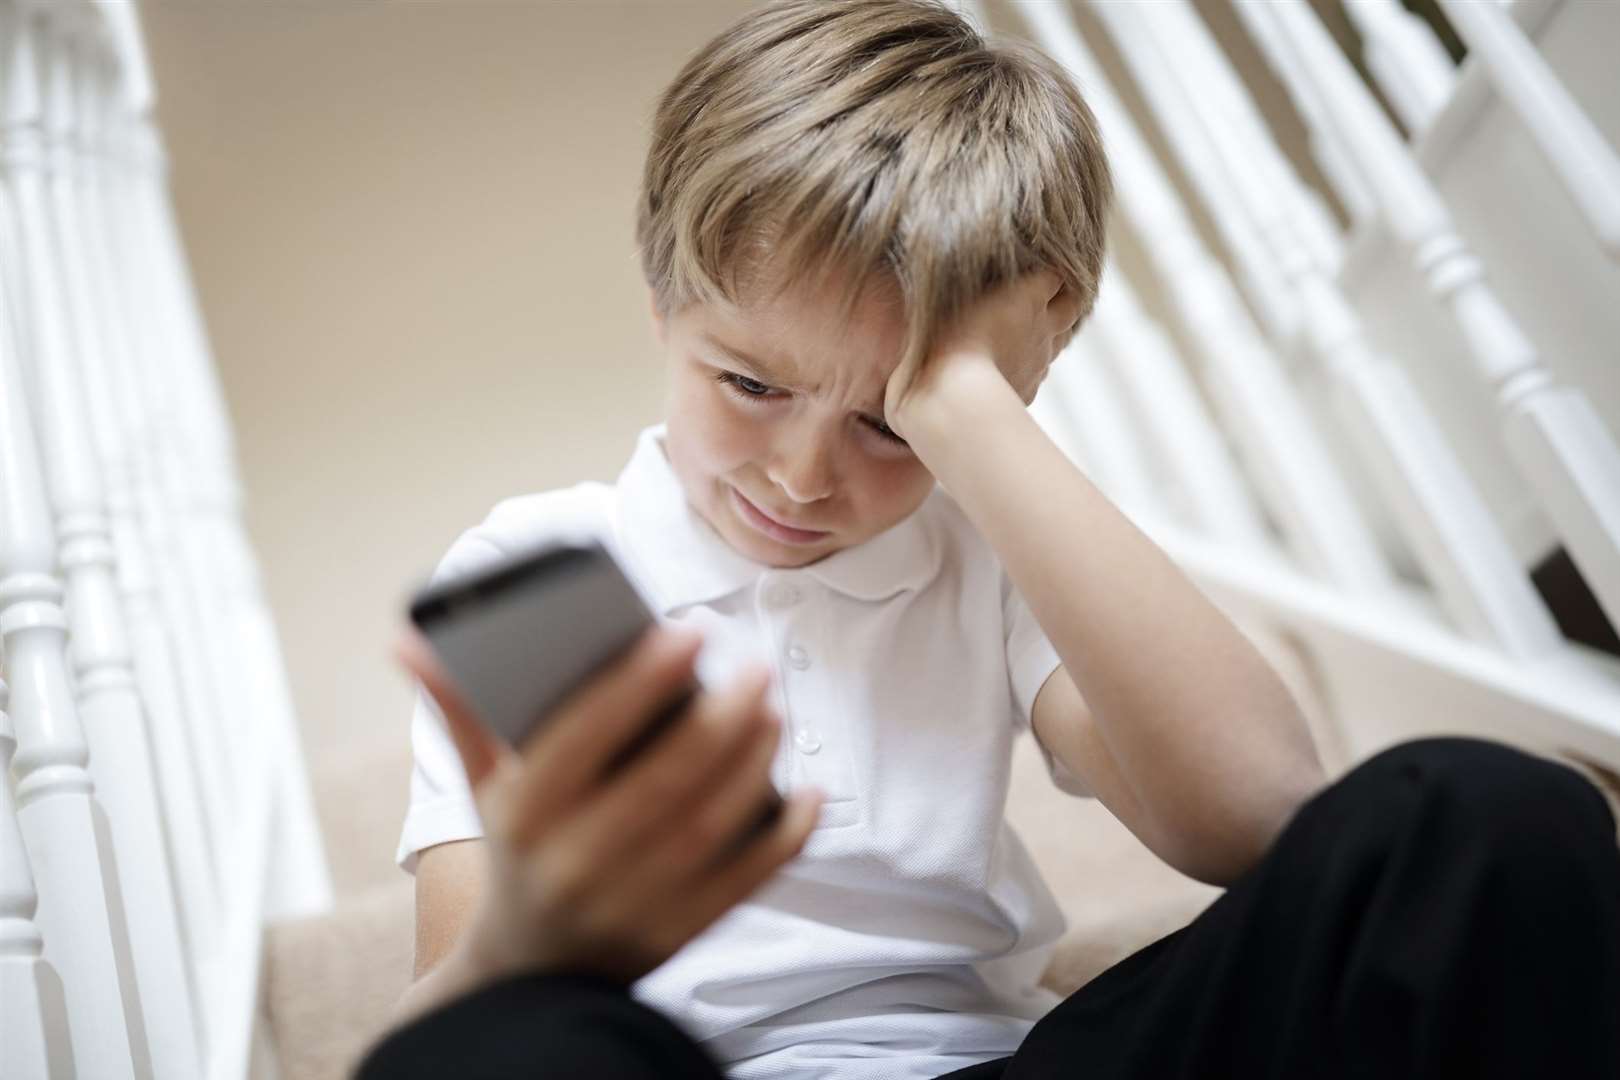 It has been argued that cyber bullying by mobile phone is just one of the ways they are being misused in schools. Stock image